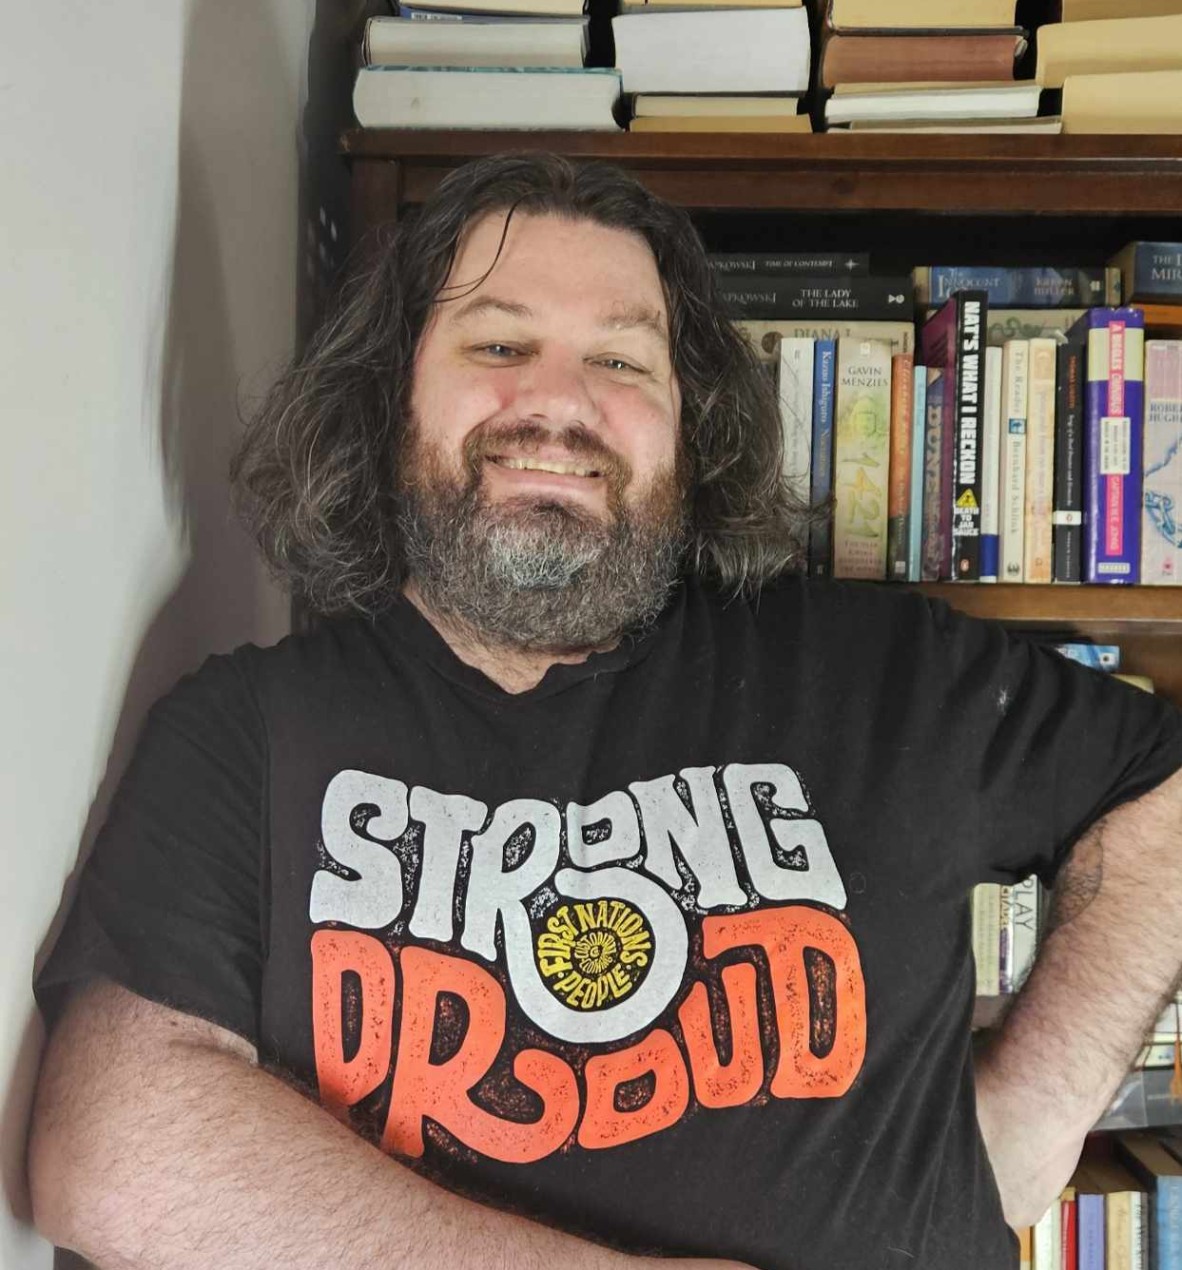 A smiling man in a black t shgirt standing in front of a tall bookcase. The shirt has writing which reads strong and proud.